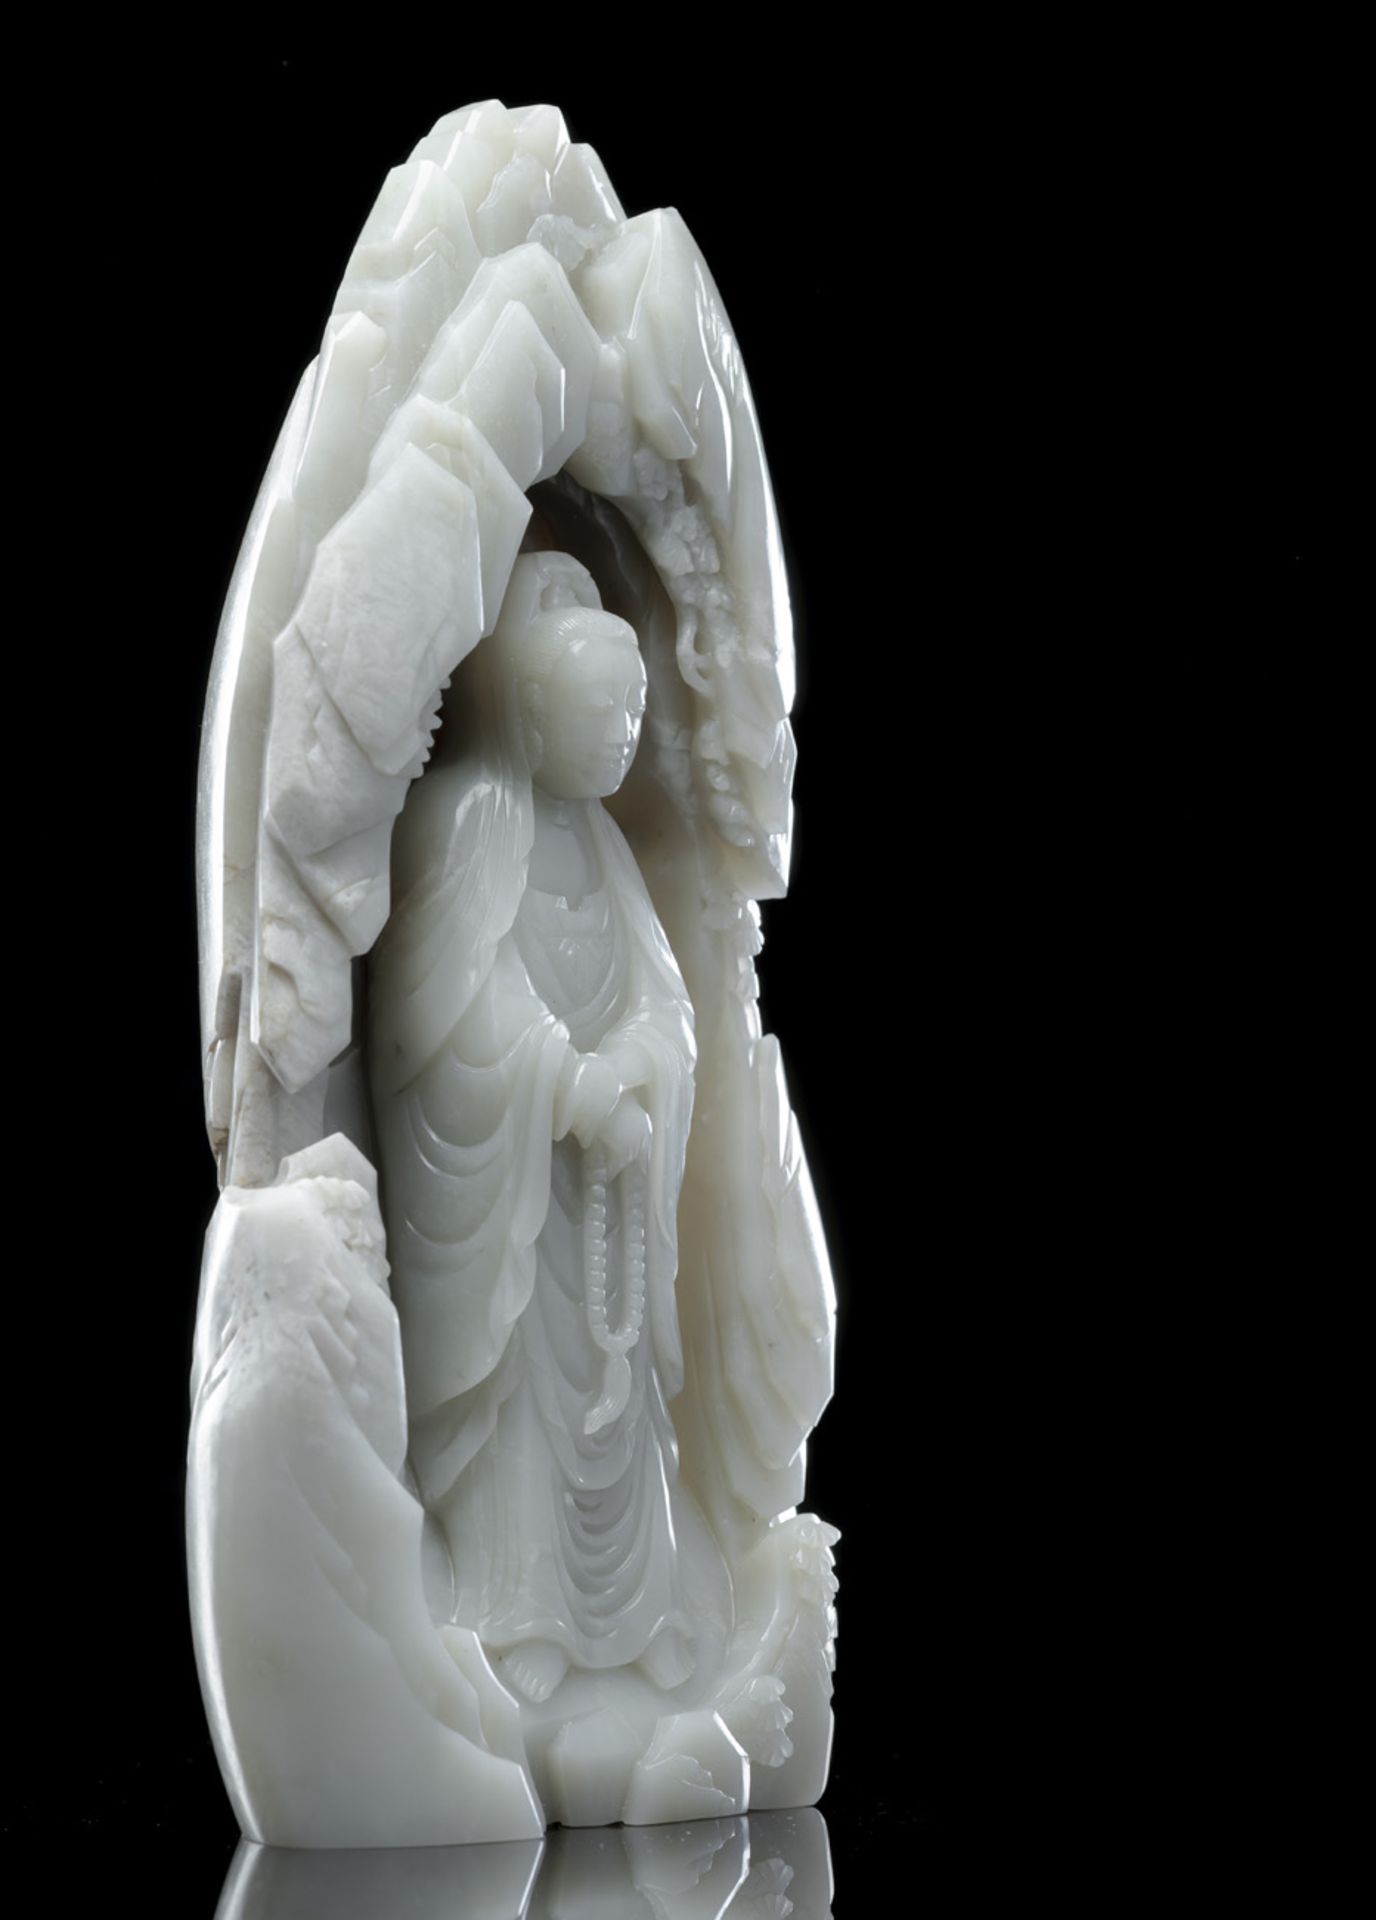 A RARE PALE CELADON JADE FIGURE OF GUANYIN IN A GROTTO - Image 2 of 6